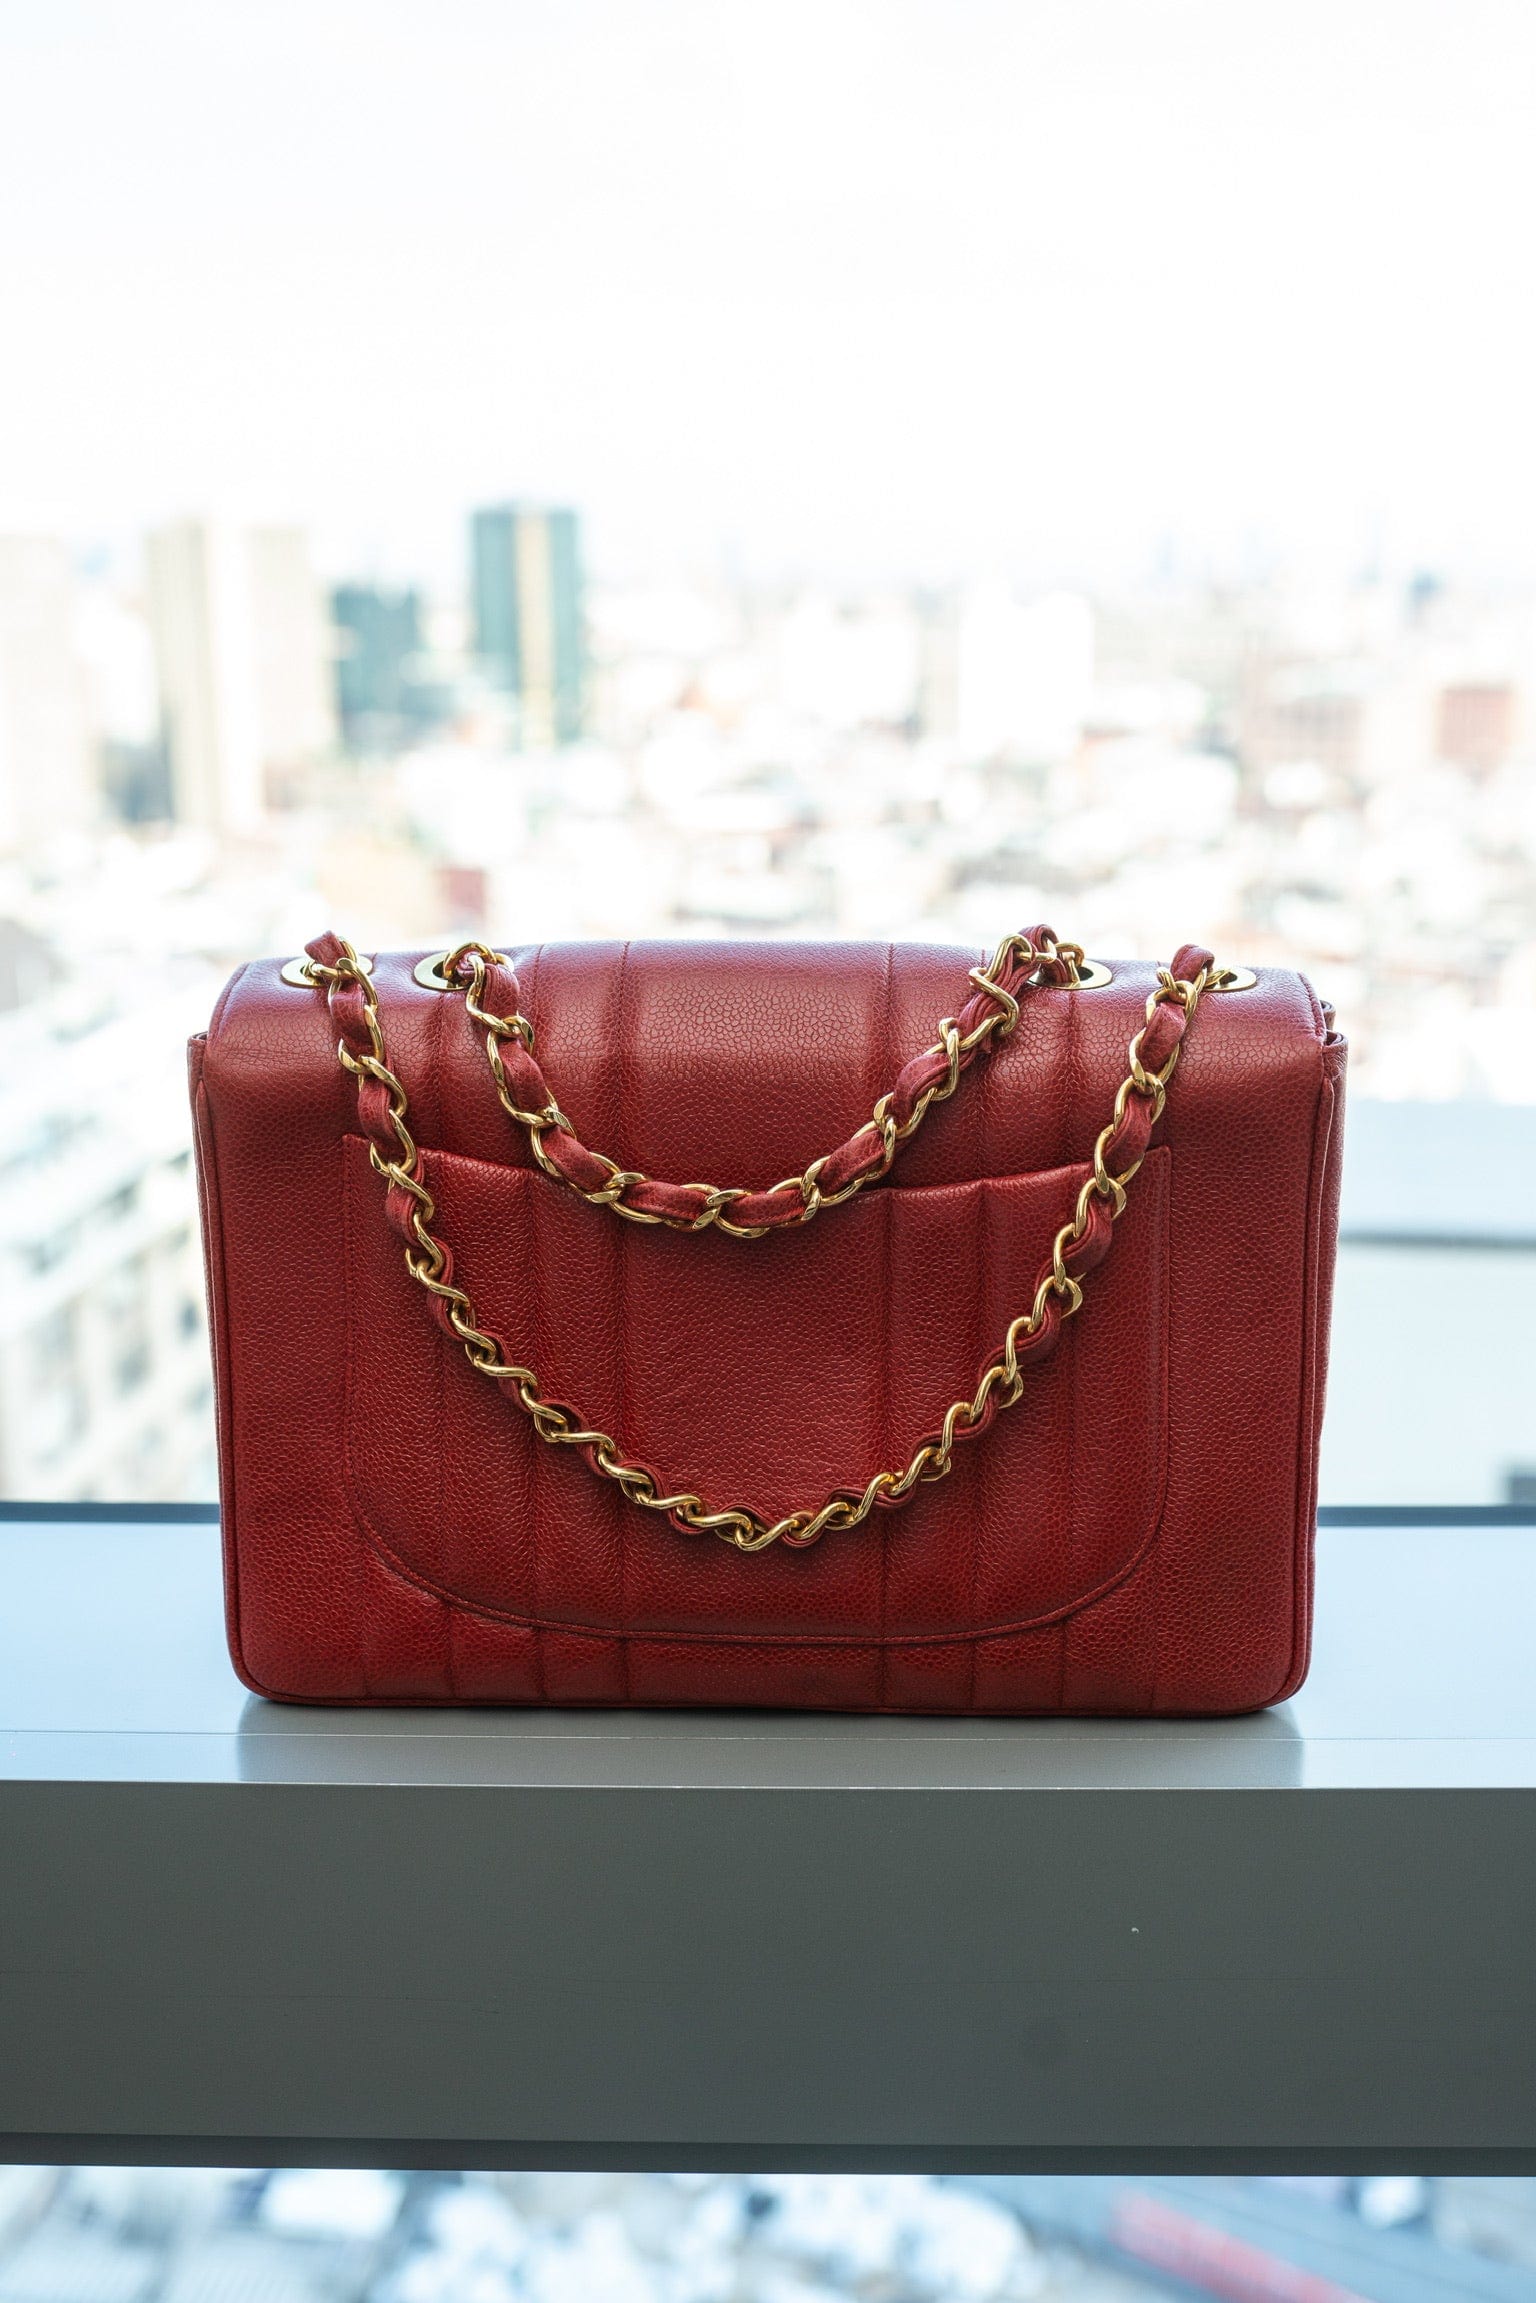 Chanel Mademoiselle Caviar Chain Shoulder Bag Red PXL1786